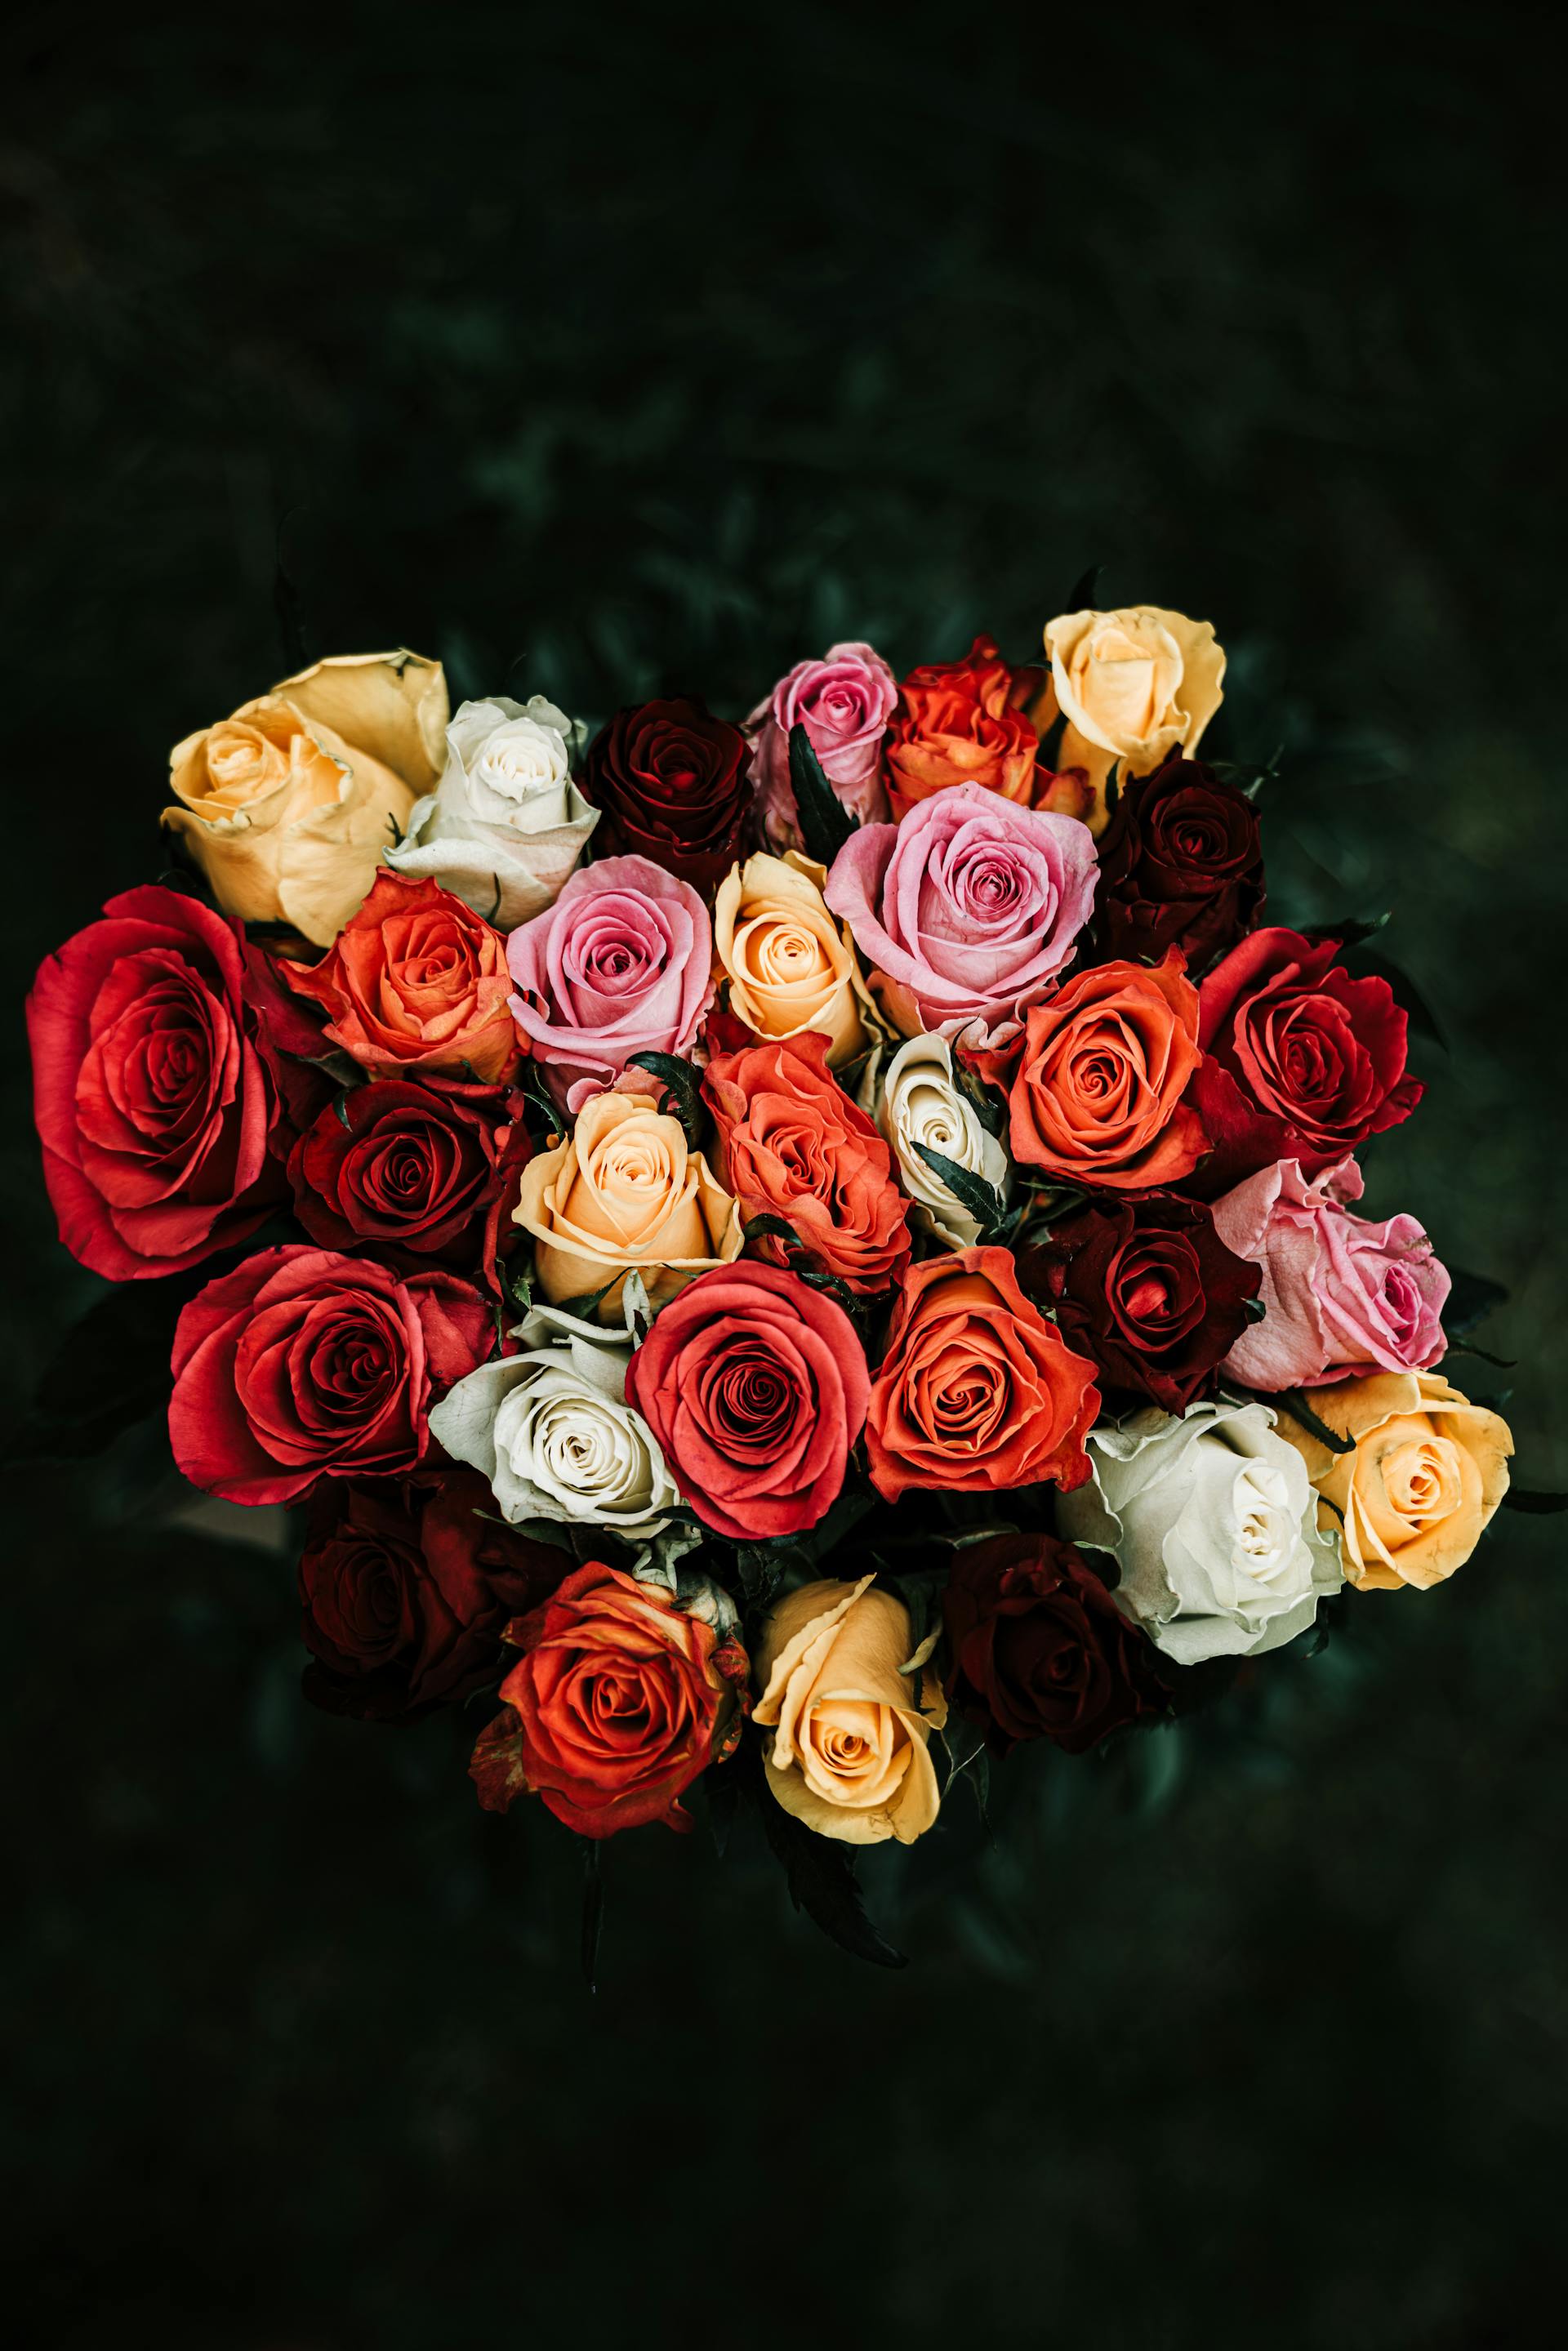 A bouquet of roses | Source: Pexels